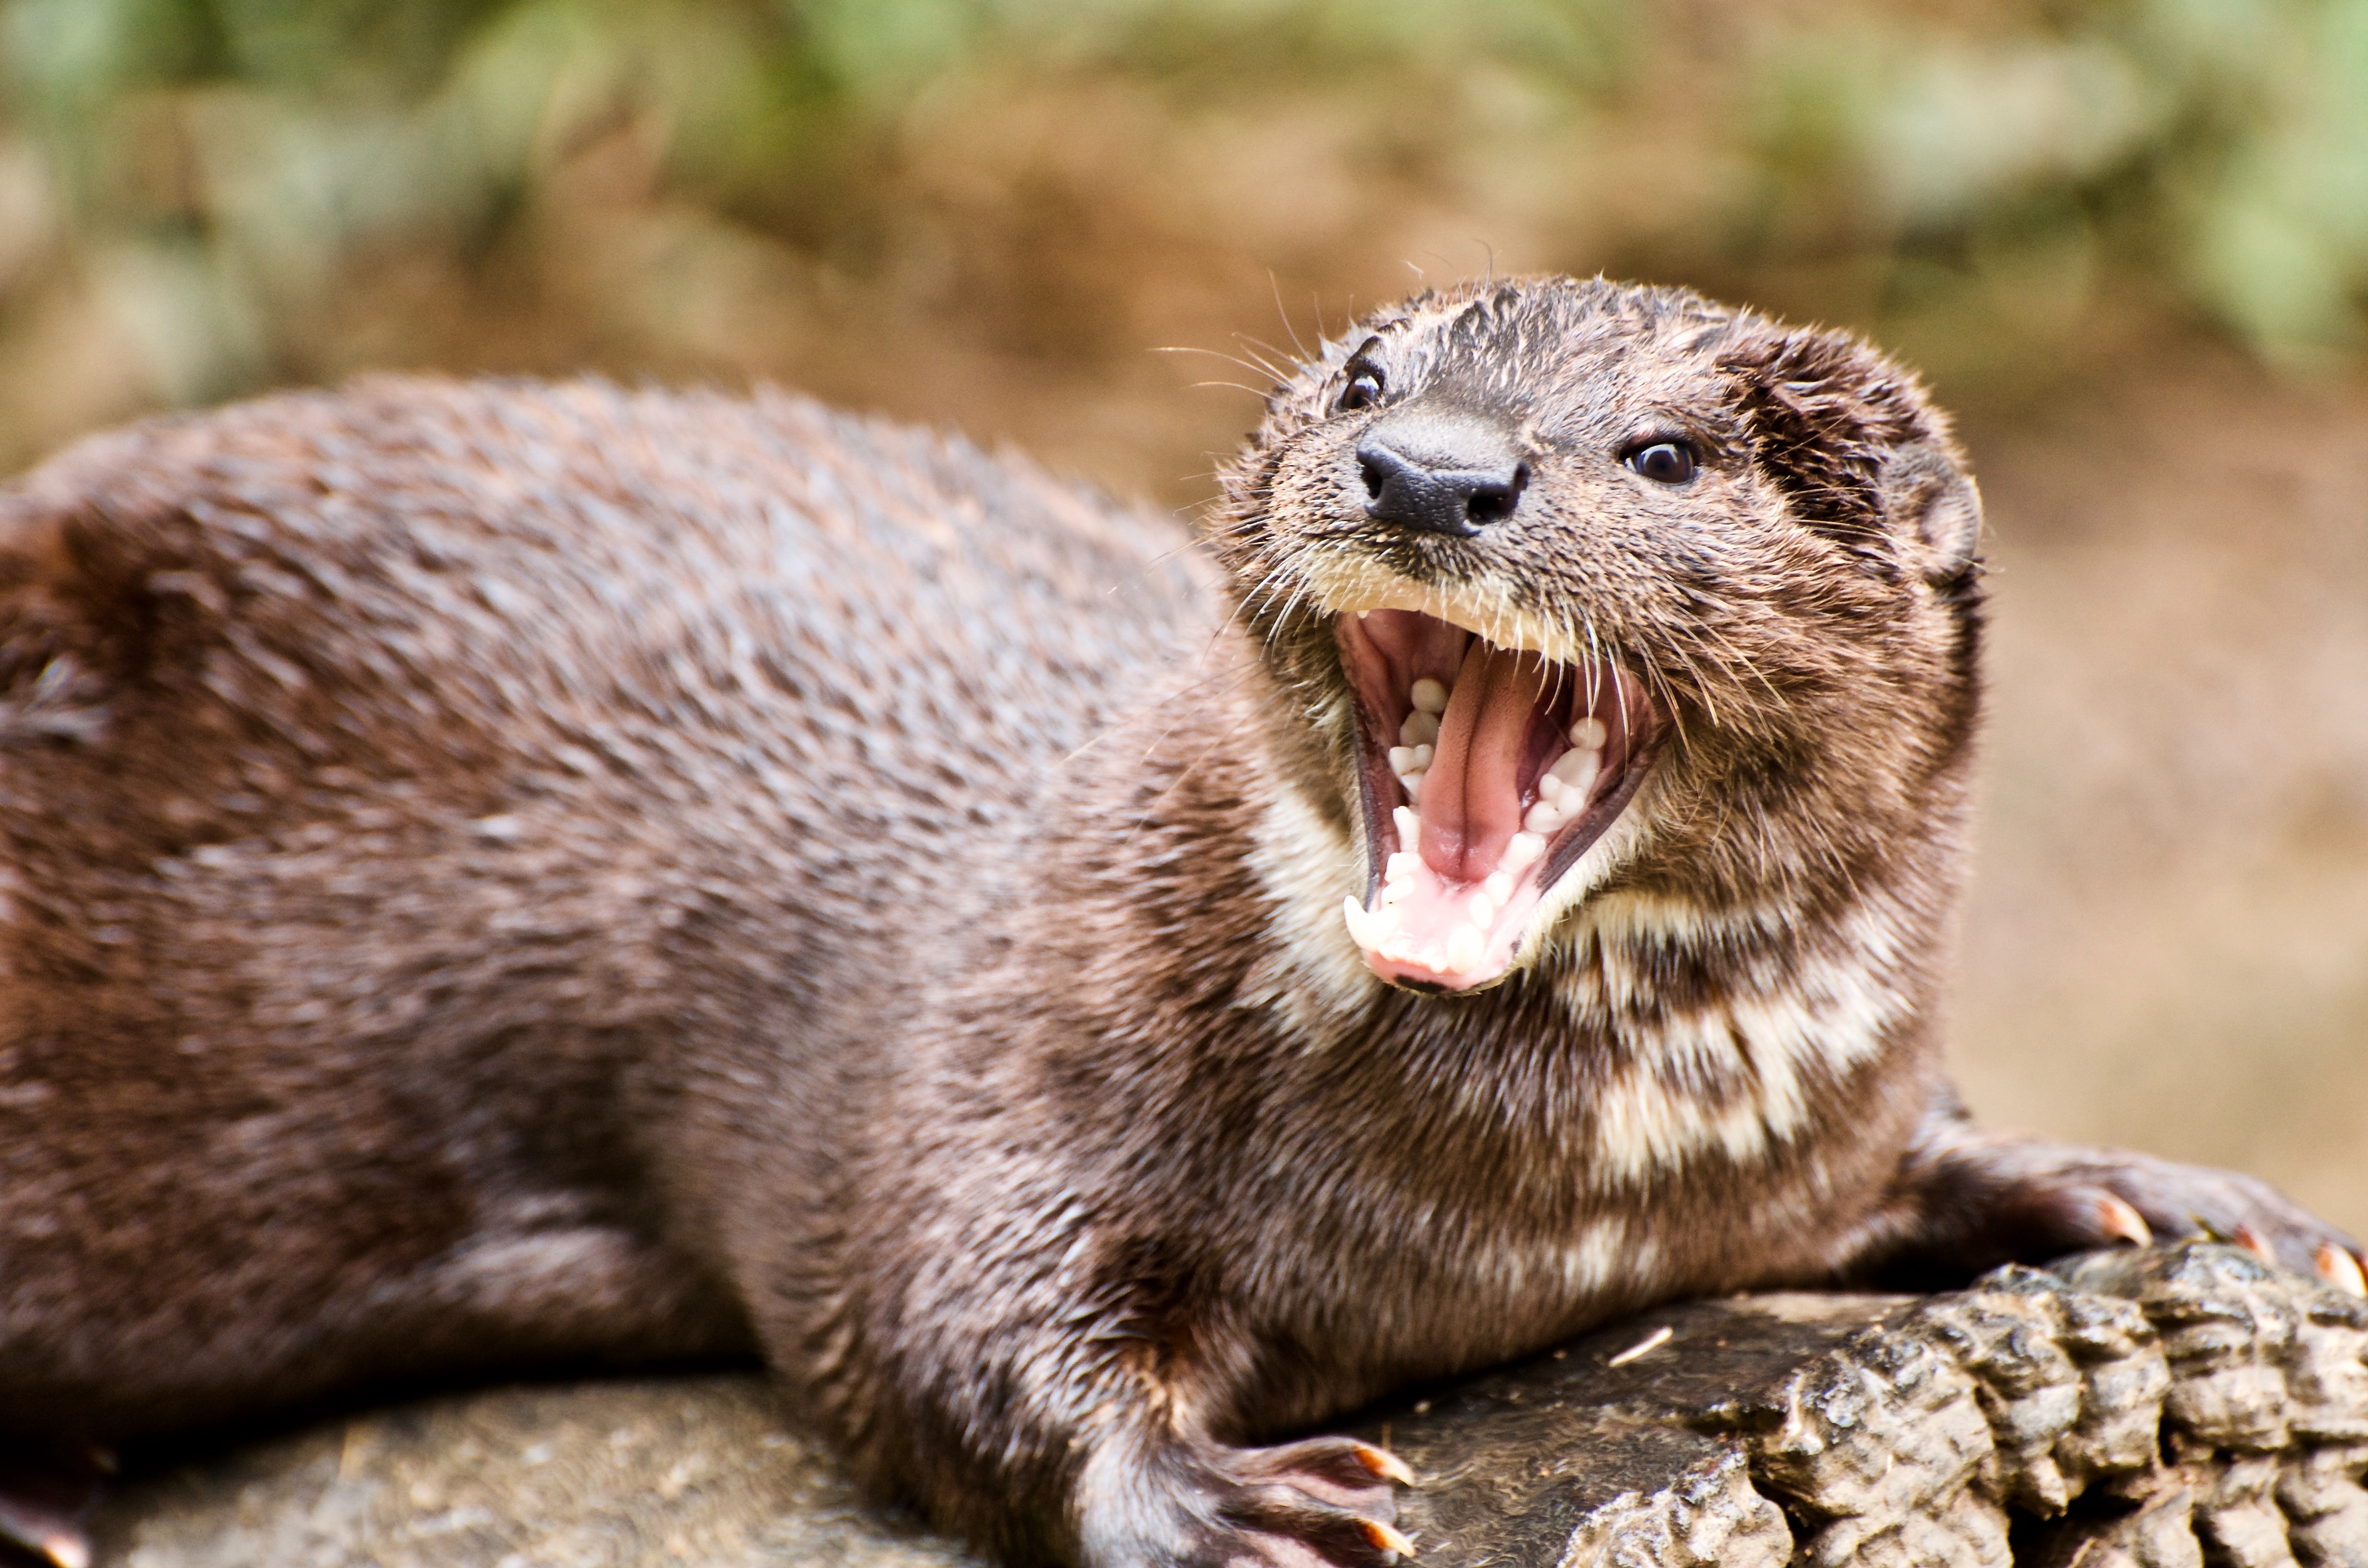 Otter opening mouth and baring teeth. Show support to someone looking for a job but without being a nuisance.